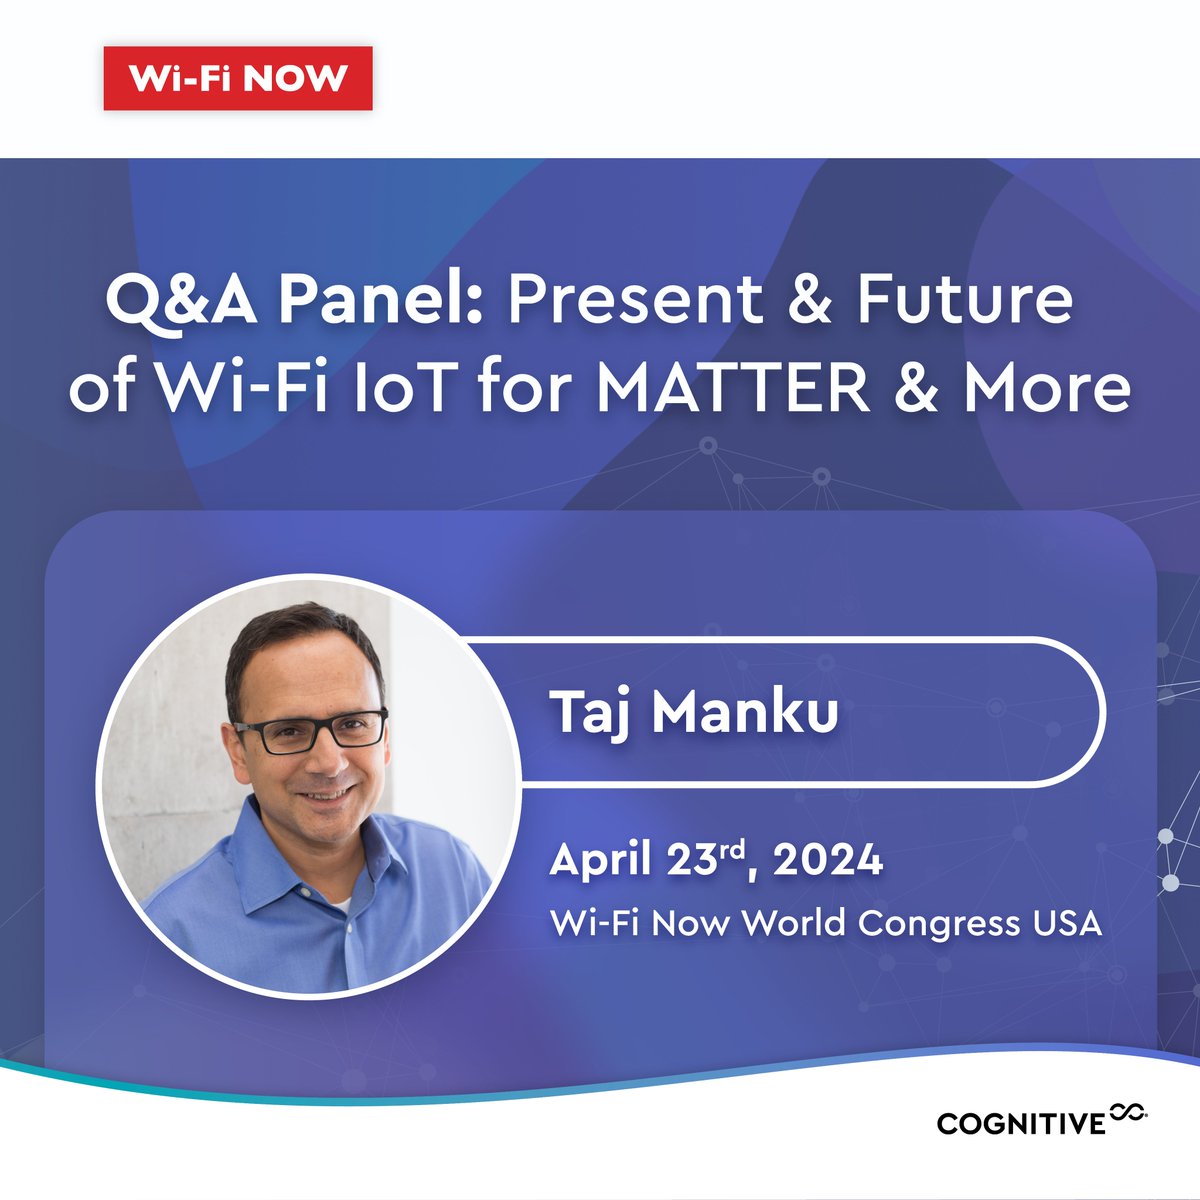 Mark your calendars for April 23rd! Dr. Taj Manku, our CEO, will be part of a Q&A panel at Wi-Fi NOW World Congress USA. Don't miss this insightful discussion about the present and future of IoT, Wi-Fi, and more. wifinowglobal.com/sarasota-2024/